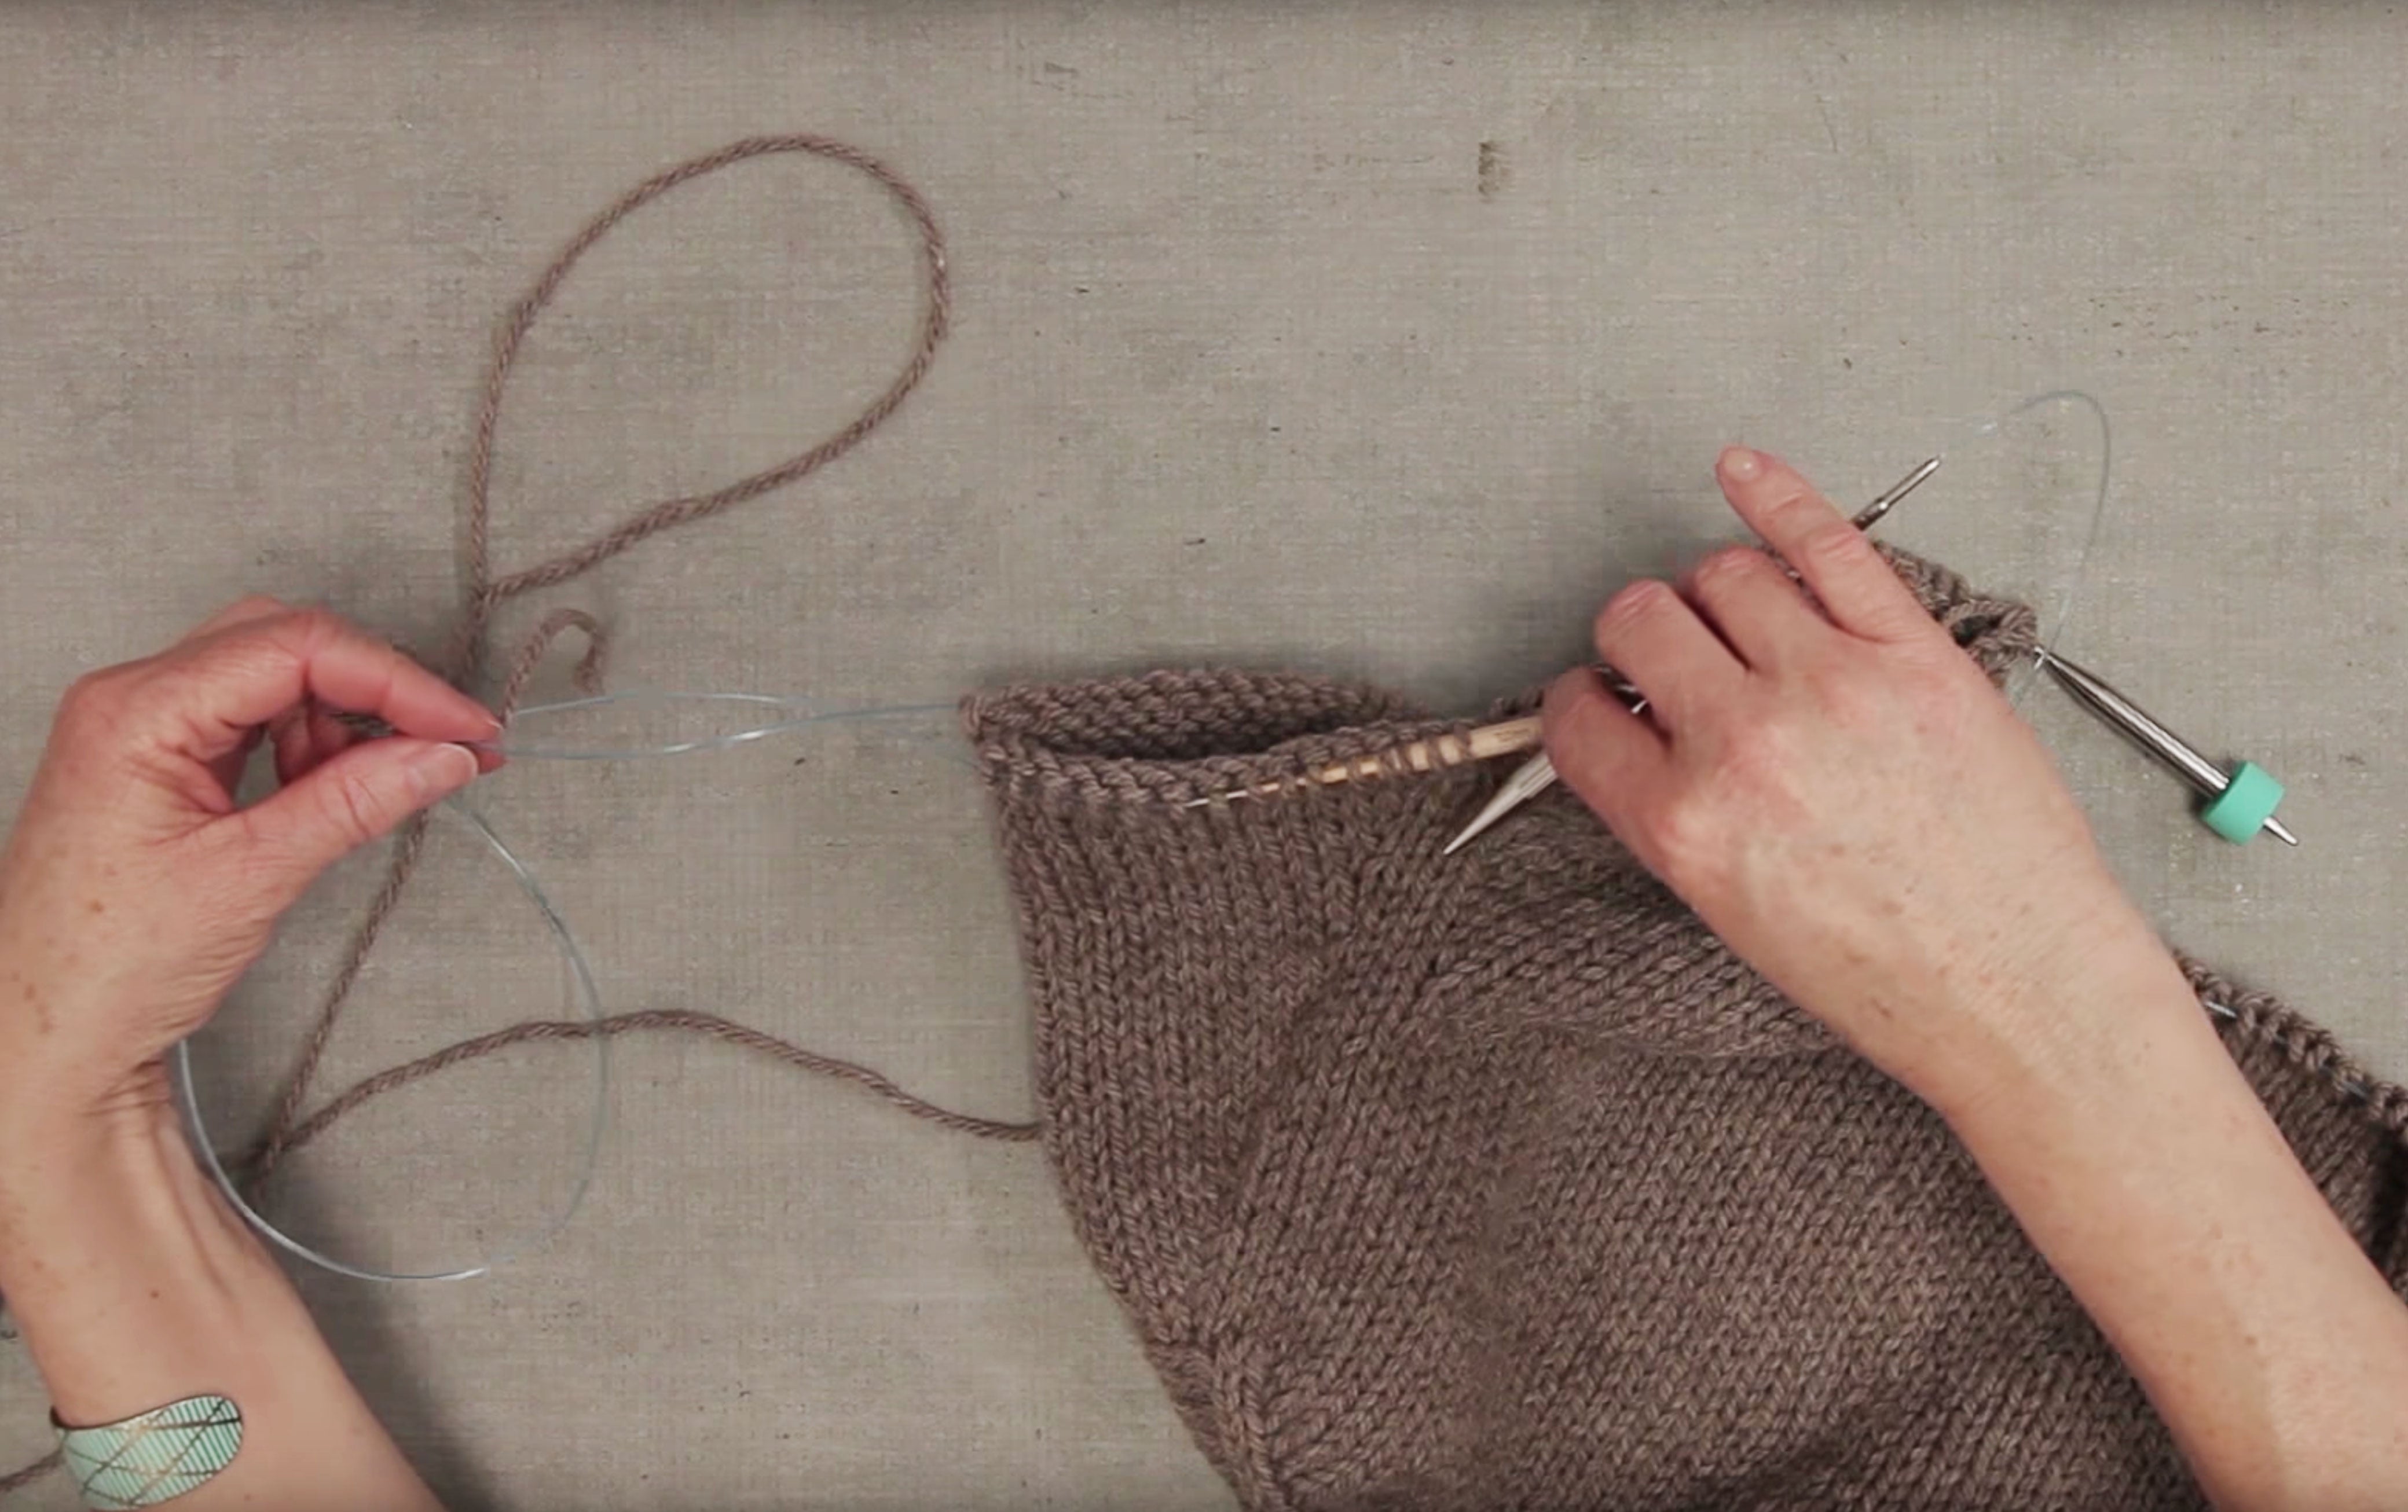 Magic Loop (How to knit in the round with circular knitting needles)